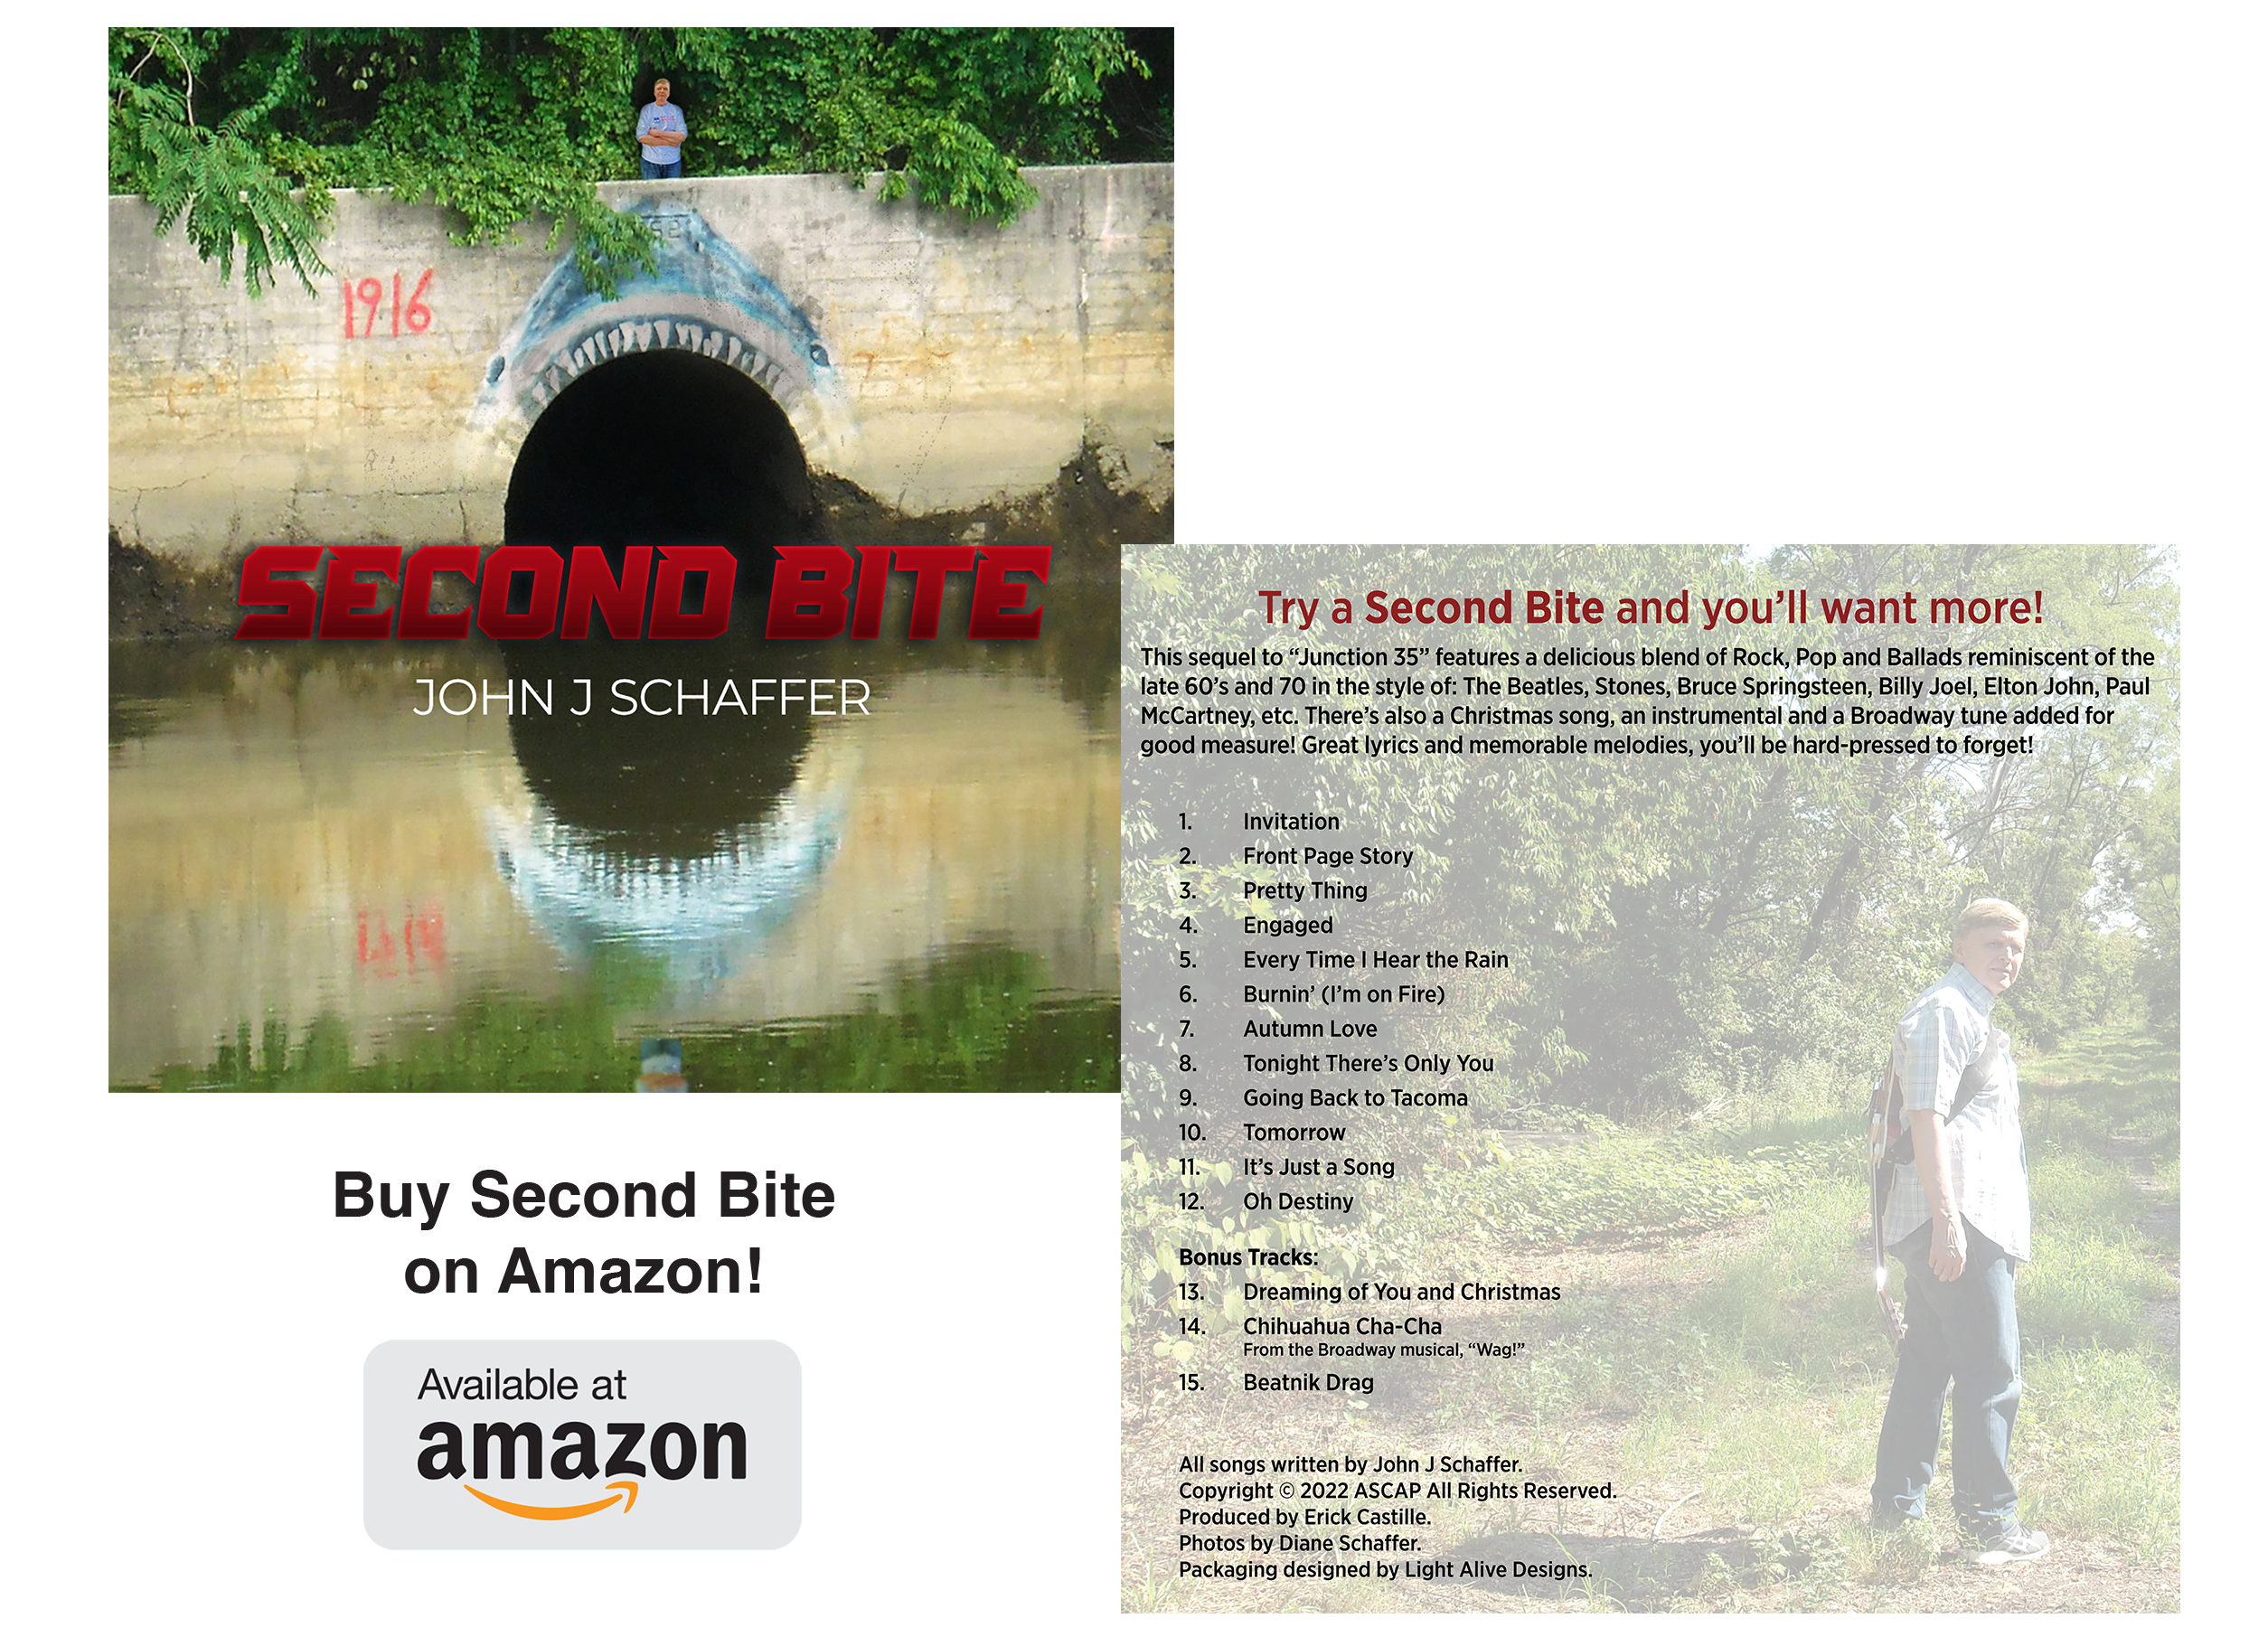 Second Bite CD cover graphic with Amazon link